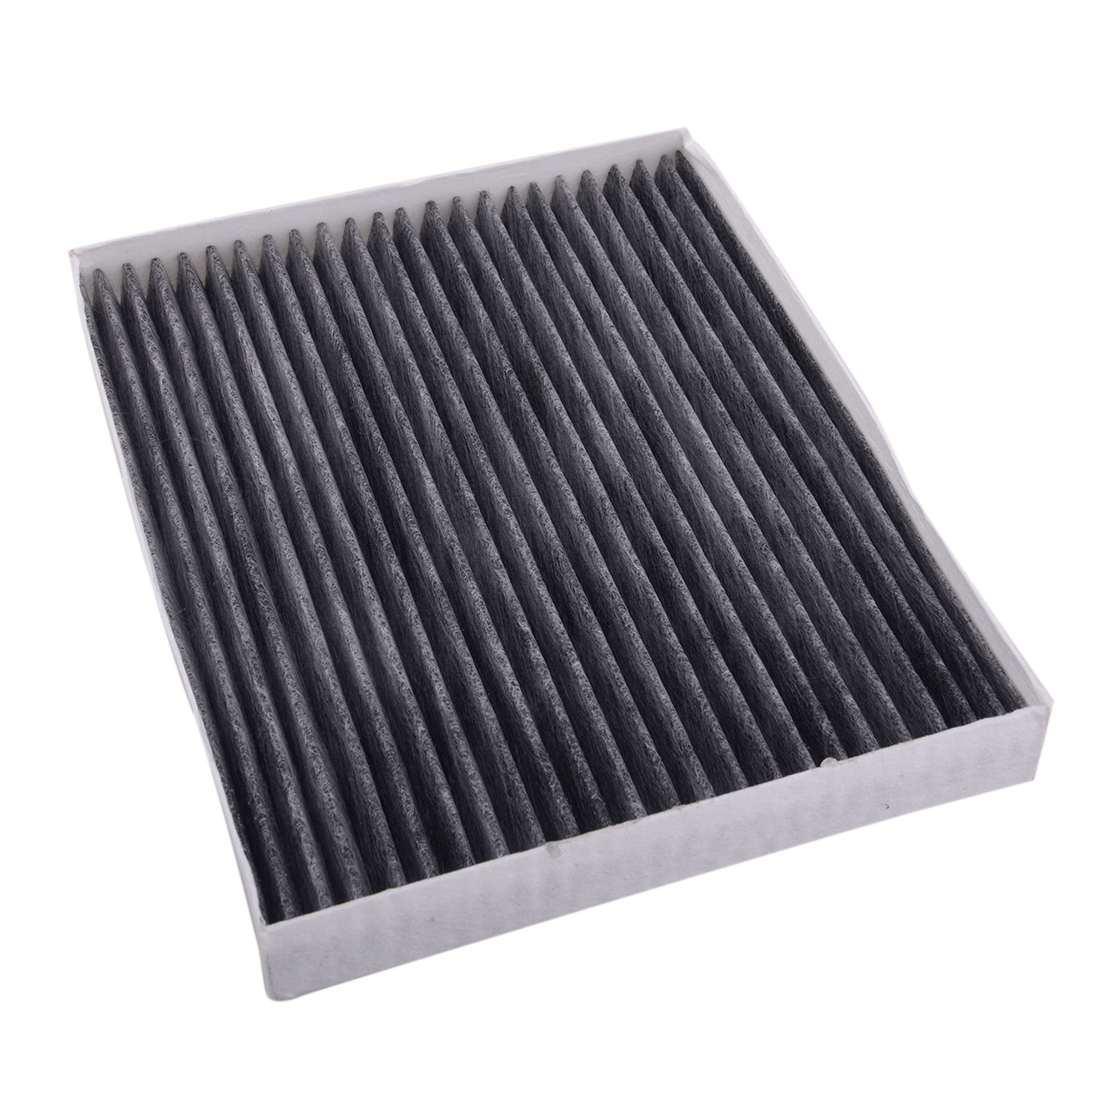 Cabin Air Filter fit for Hyundai Accent Elantra Kia Forte Rio 2018 2019 2020 | eBay 2019 Kia Forte Cabin Air Filter Replacement